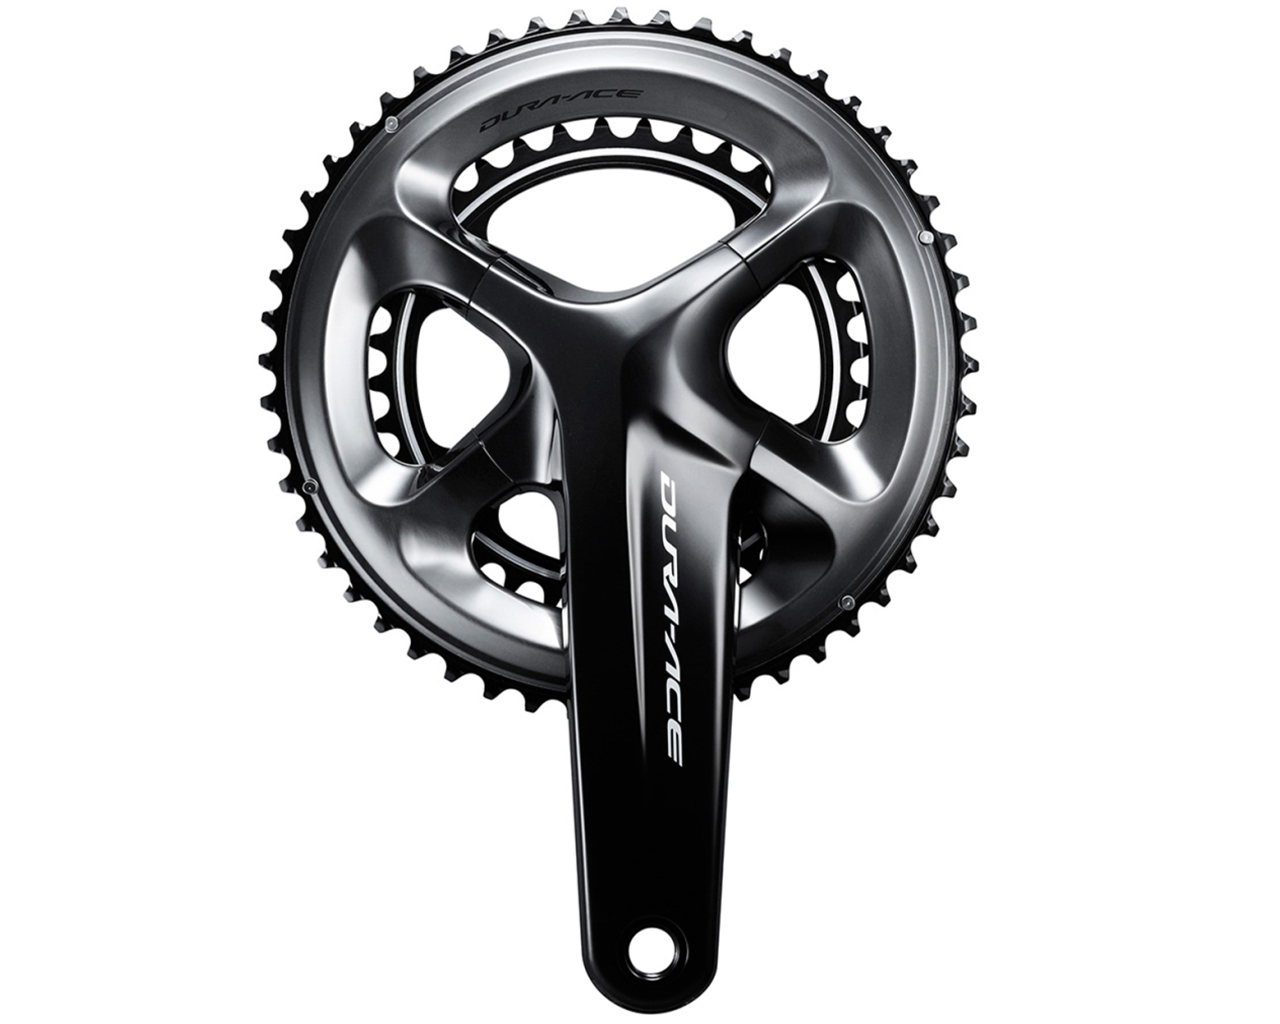 Shimano Dura Ace R9100 Chainset - 11 Speed | Merlin Cycles